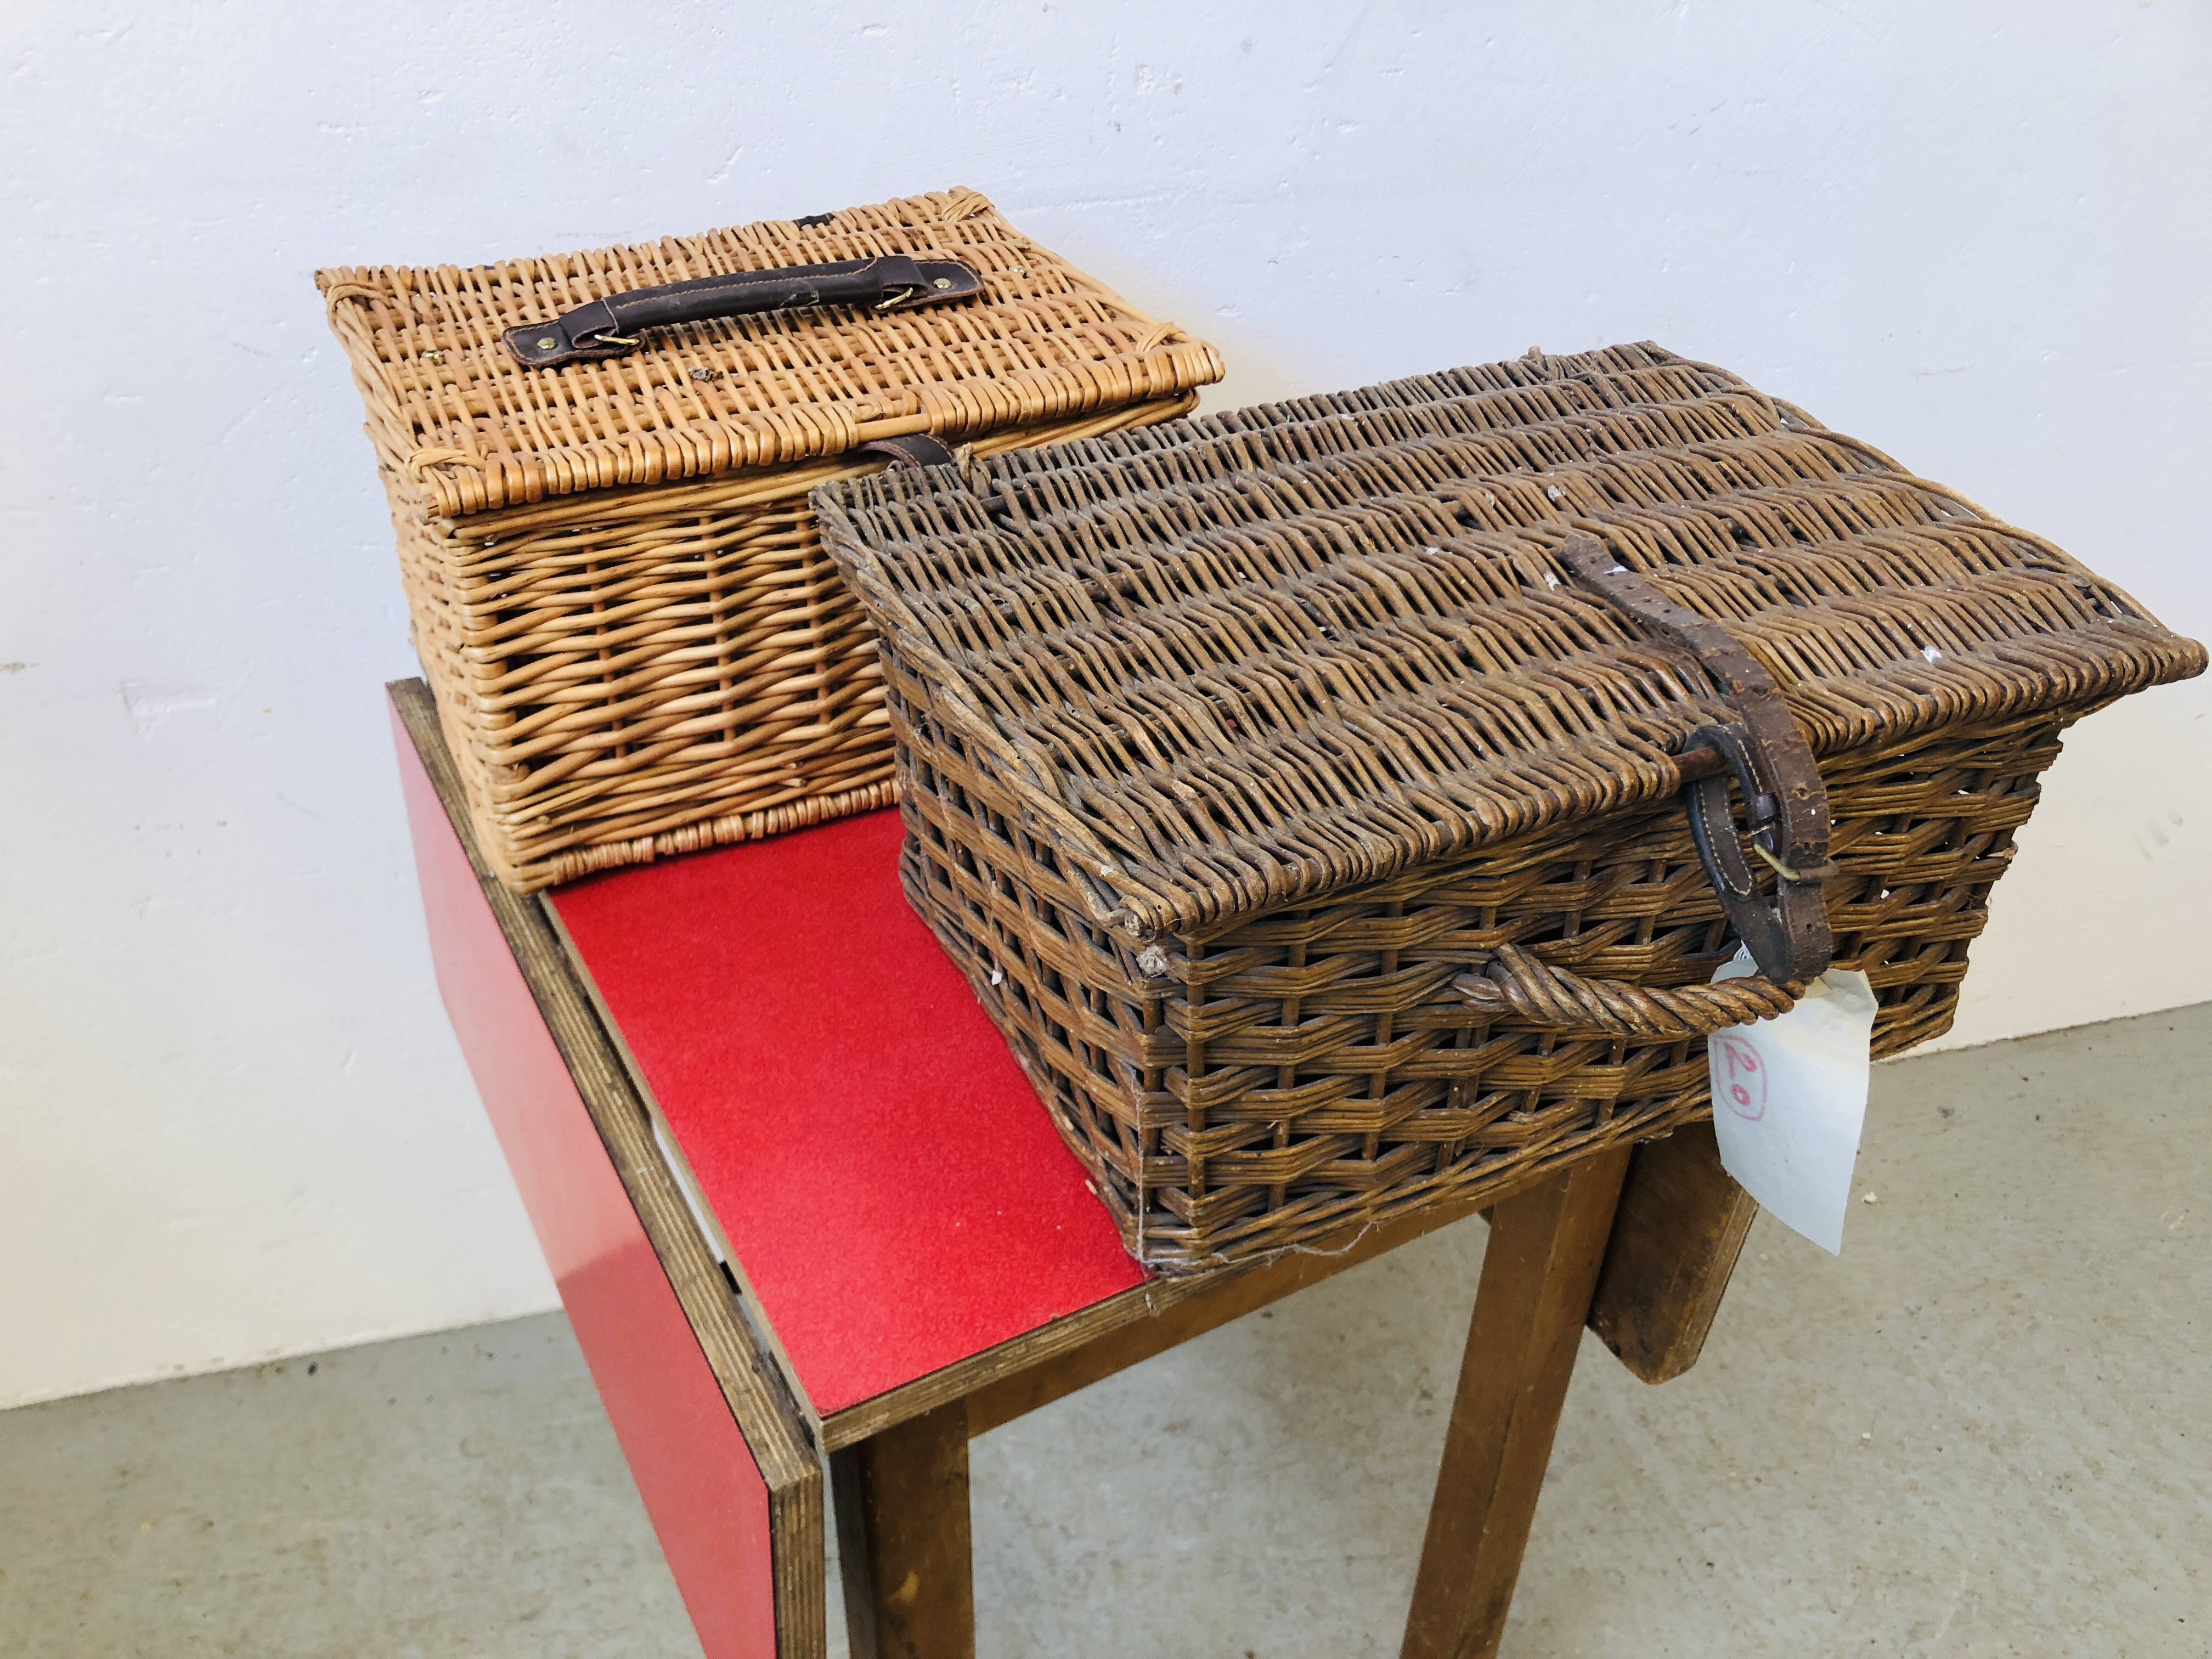 FORMICA DROP LEAF TABLE ALONG WITH TWO WICKER PICNIC BASKETS. - Image 6 of 6